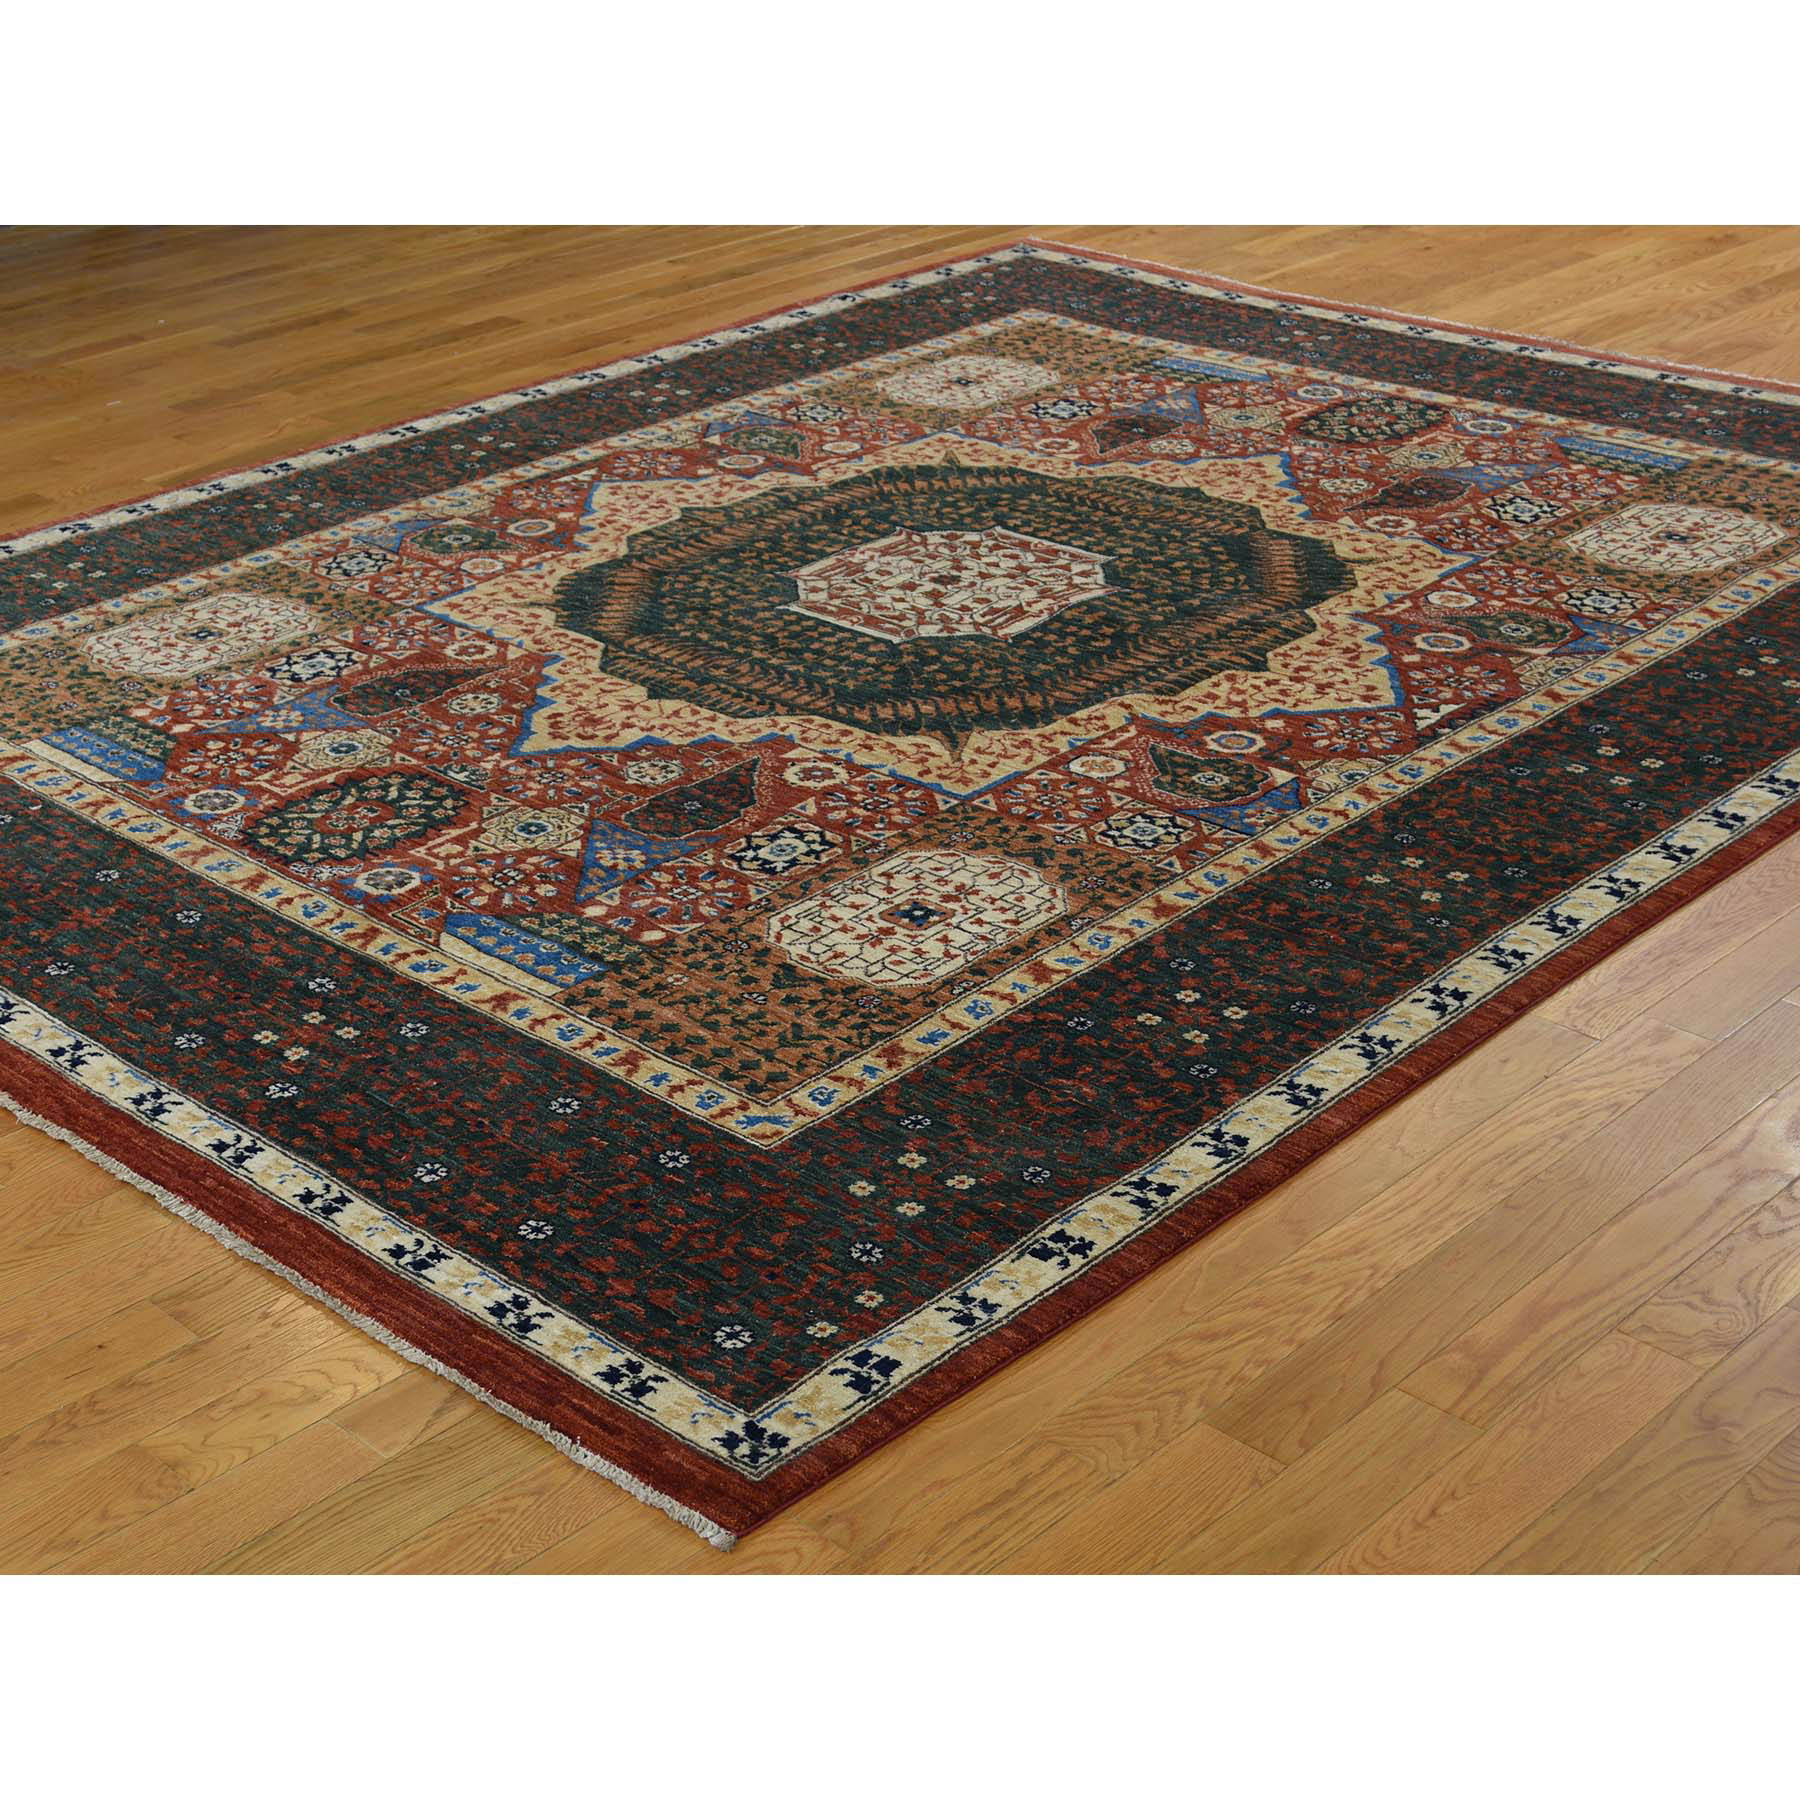 8-1 x10- Peshawar with Mamluk Design Hand-Knotted Pure Wool Oriental Rug 